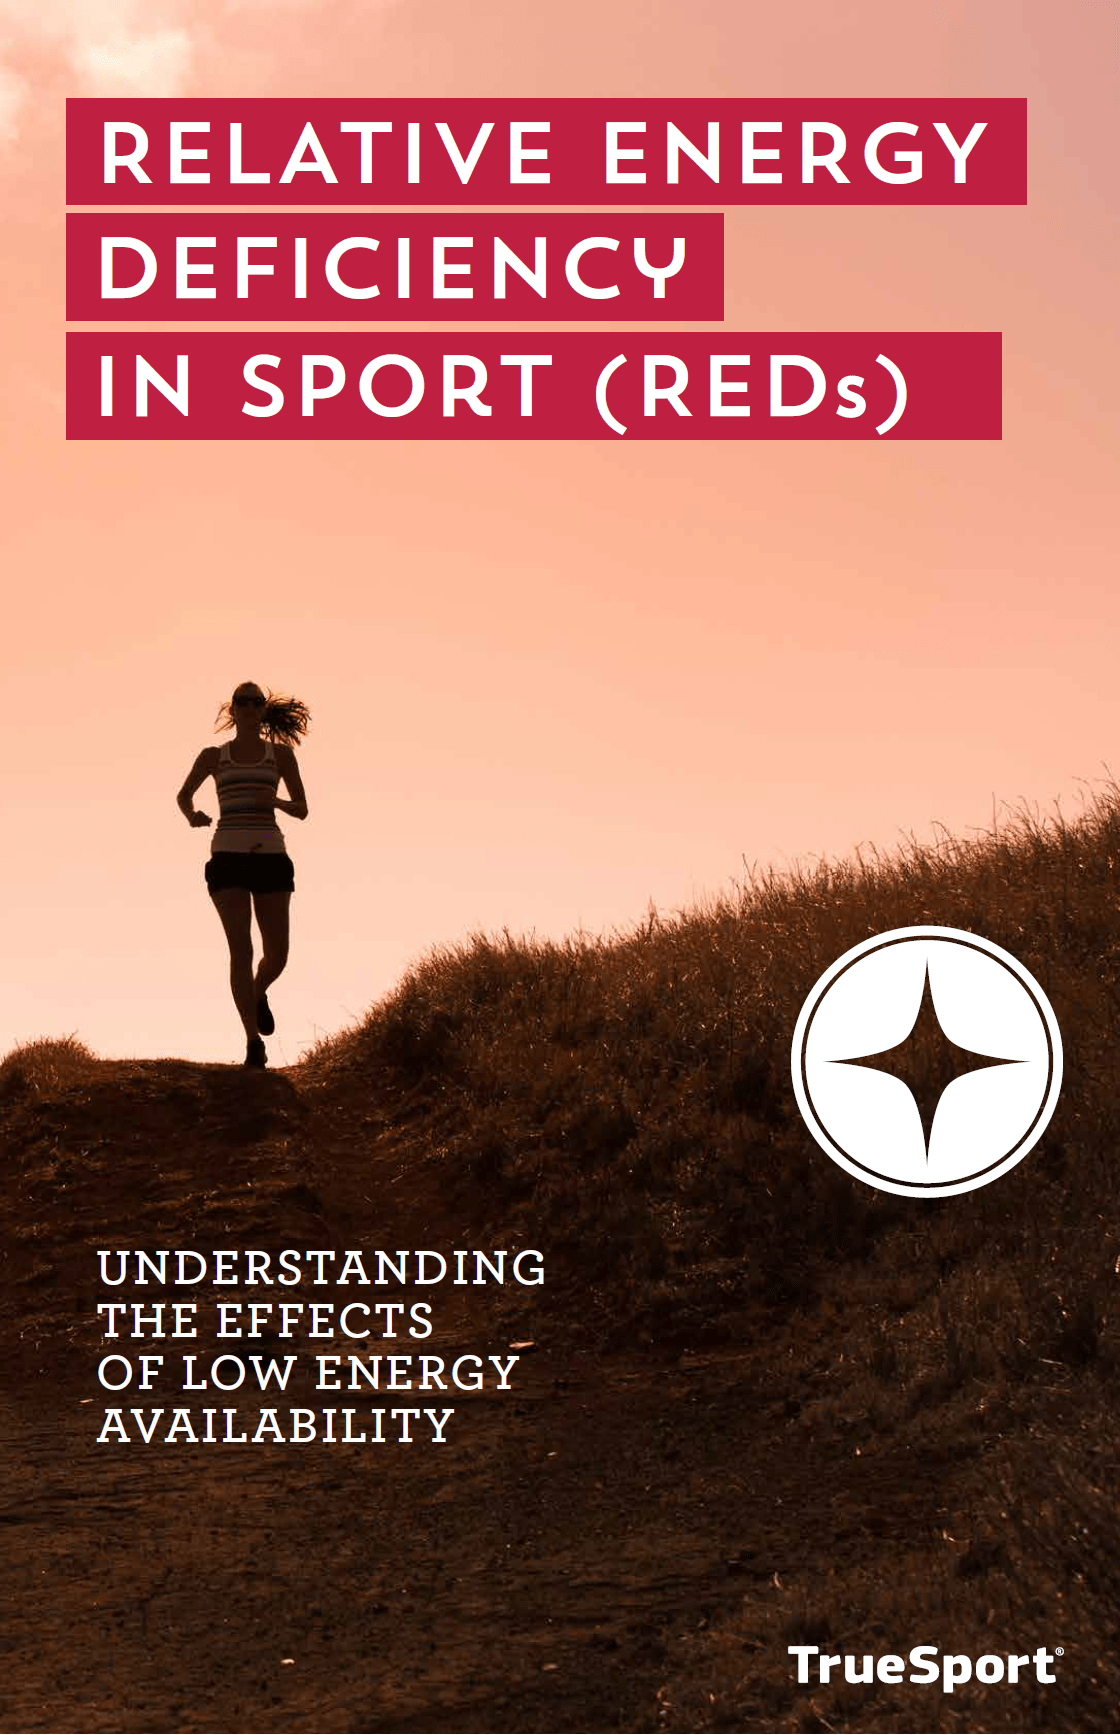 Relative Energy Deficiency in Sport (REDs) publication cover image of a woman running.